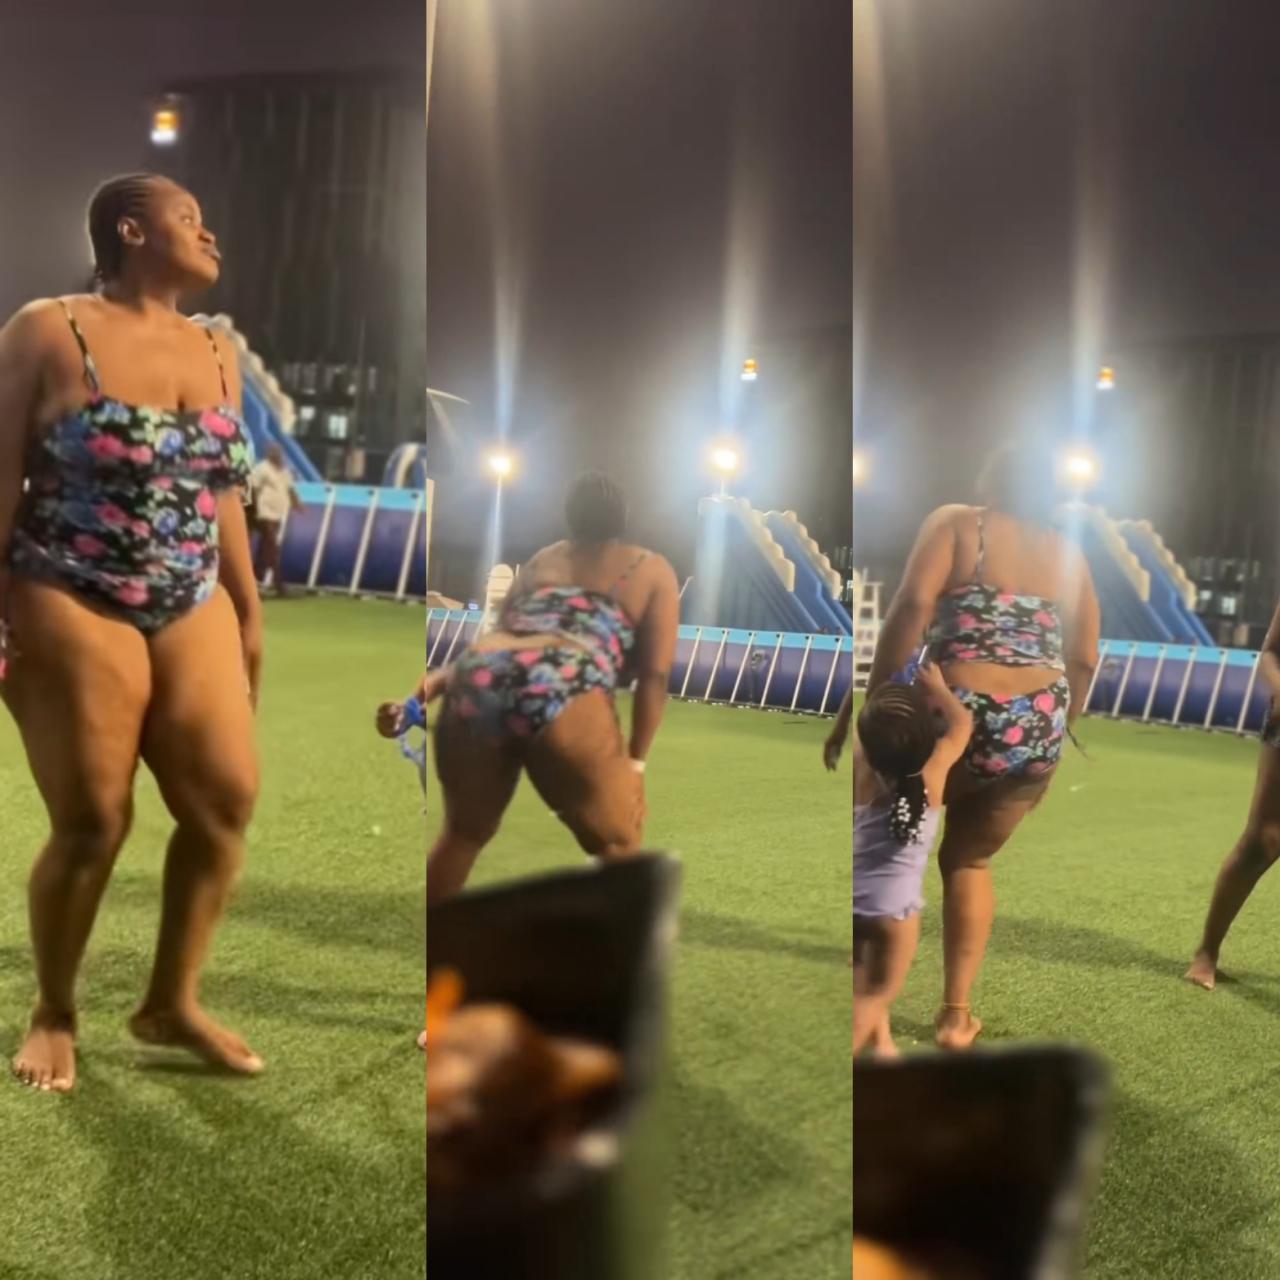 Uche Ogbodo clashes with followers who called her out for exposing her body in swimwear video